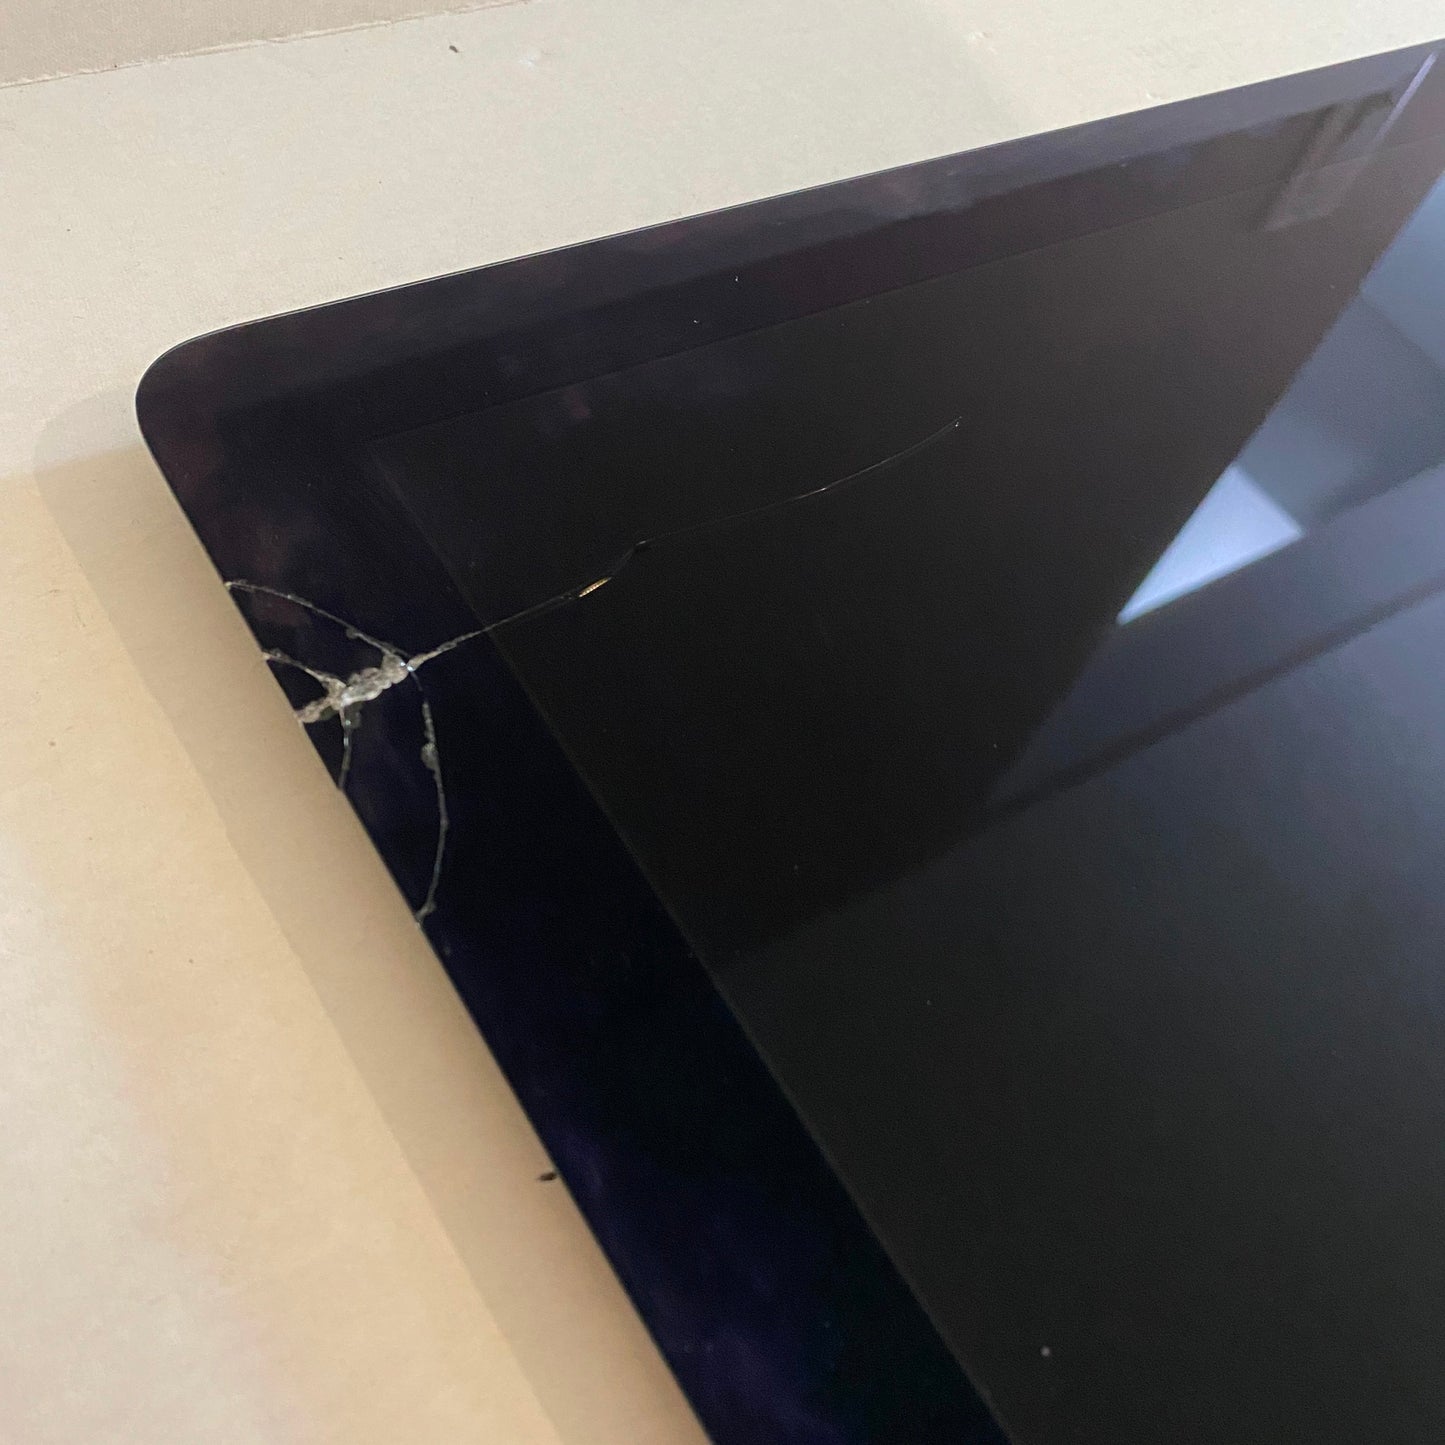 For Parts - Late 2015 27"iMac 5K - LM270QQ1 (SD) (A2)